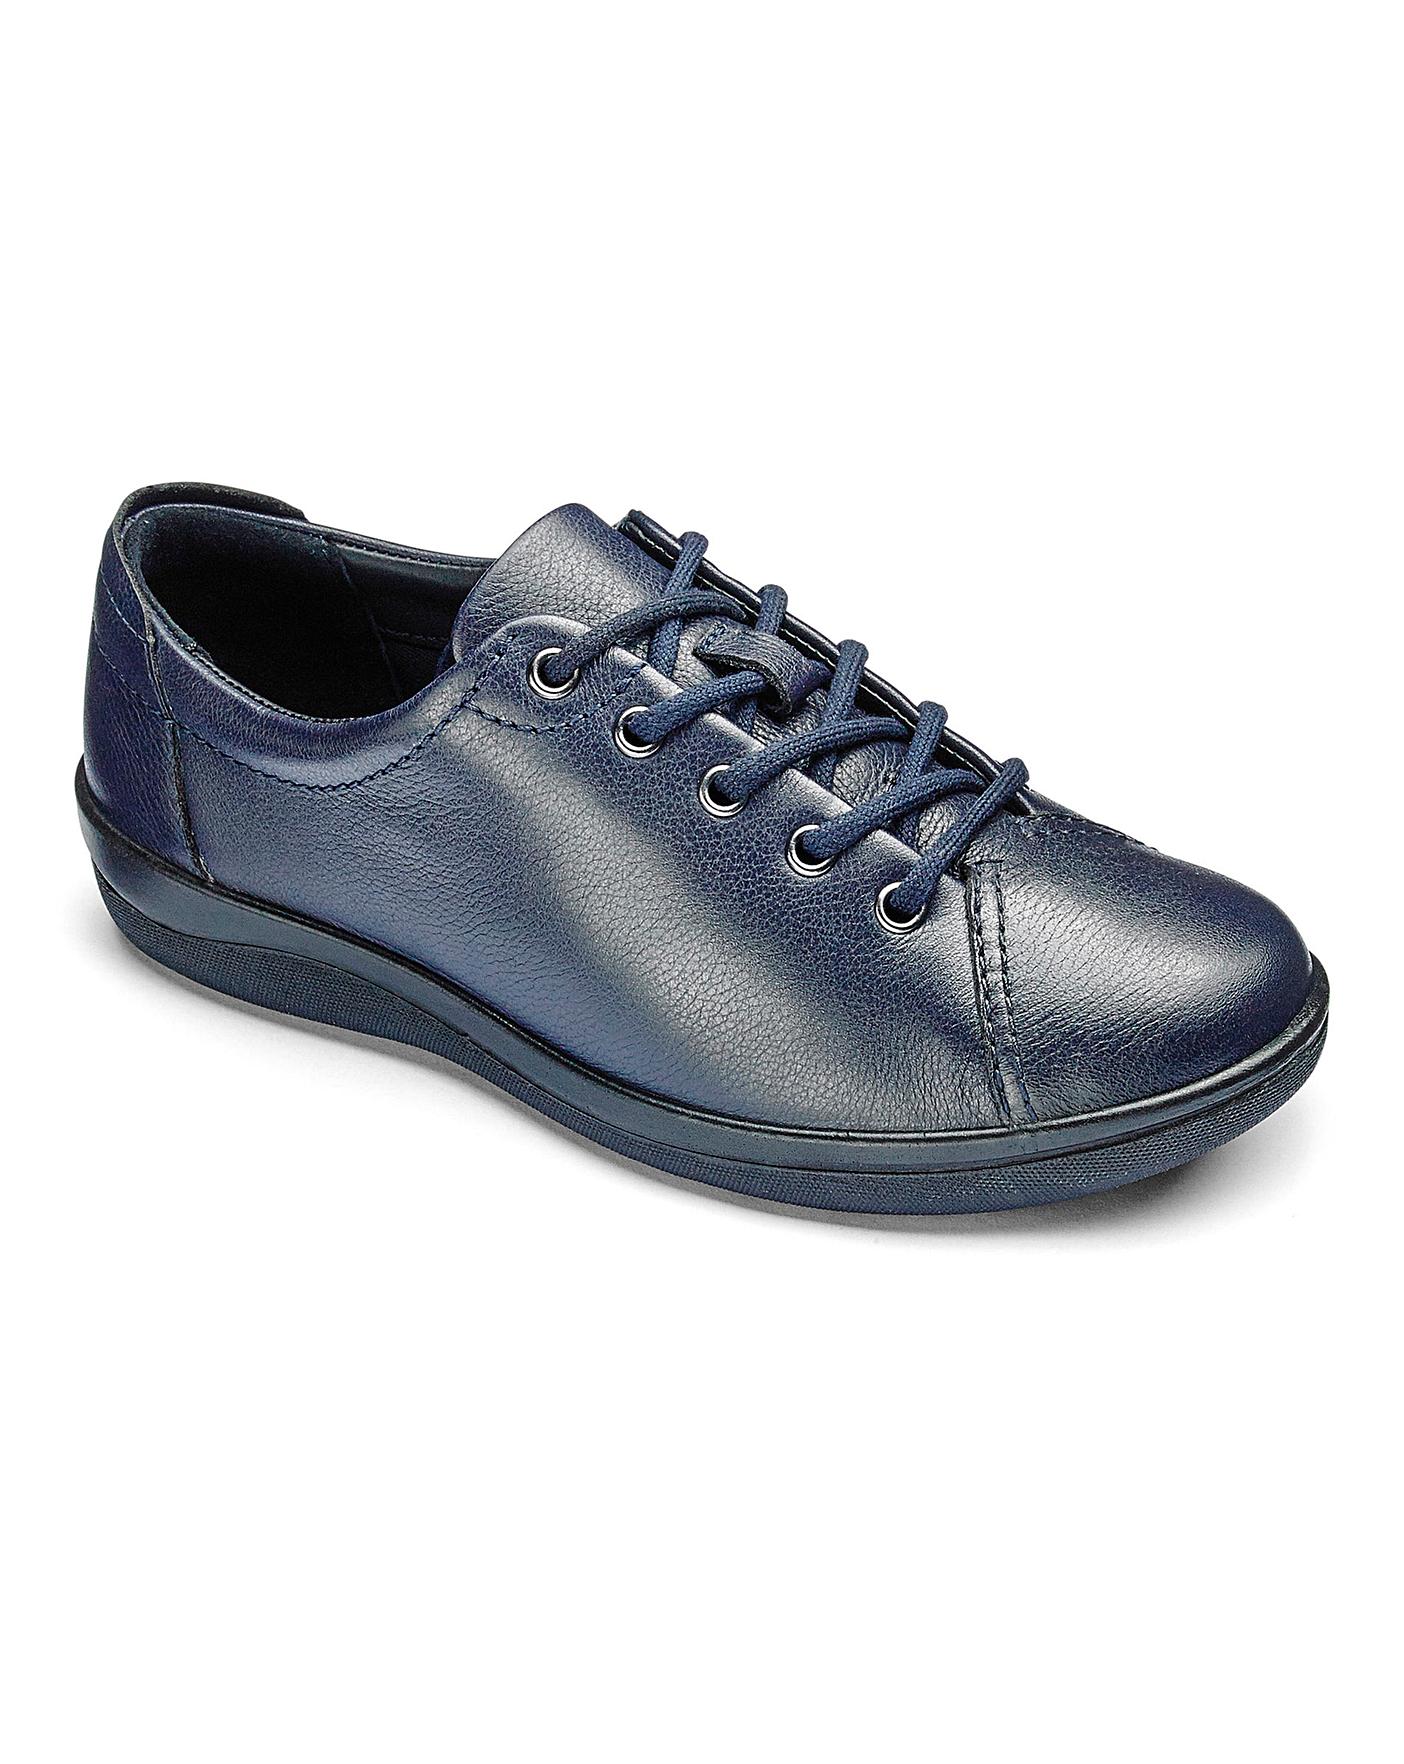 padders women's shoes extra wide